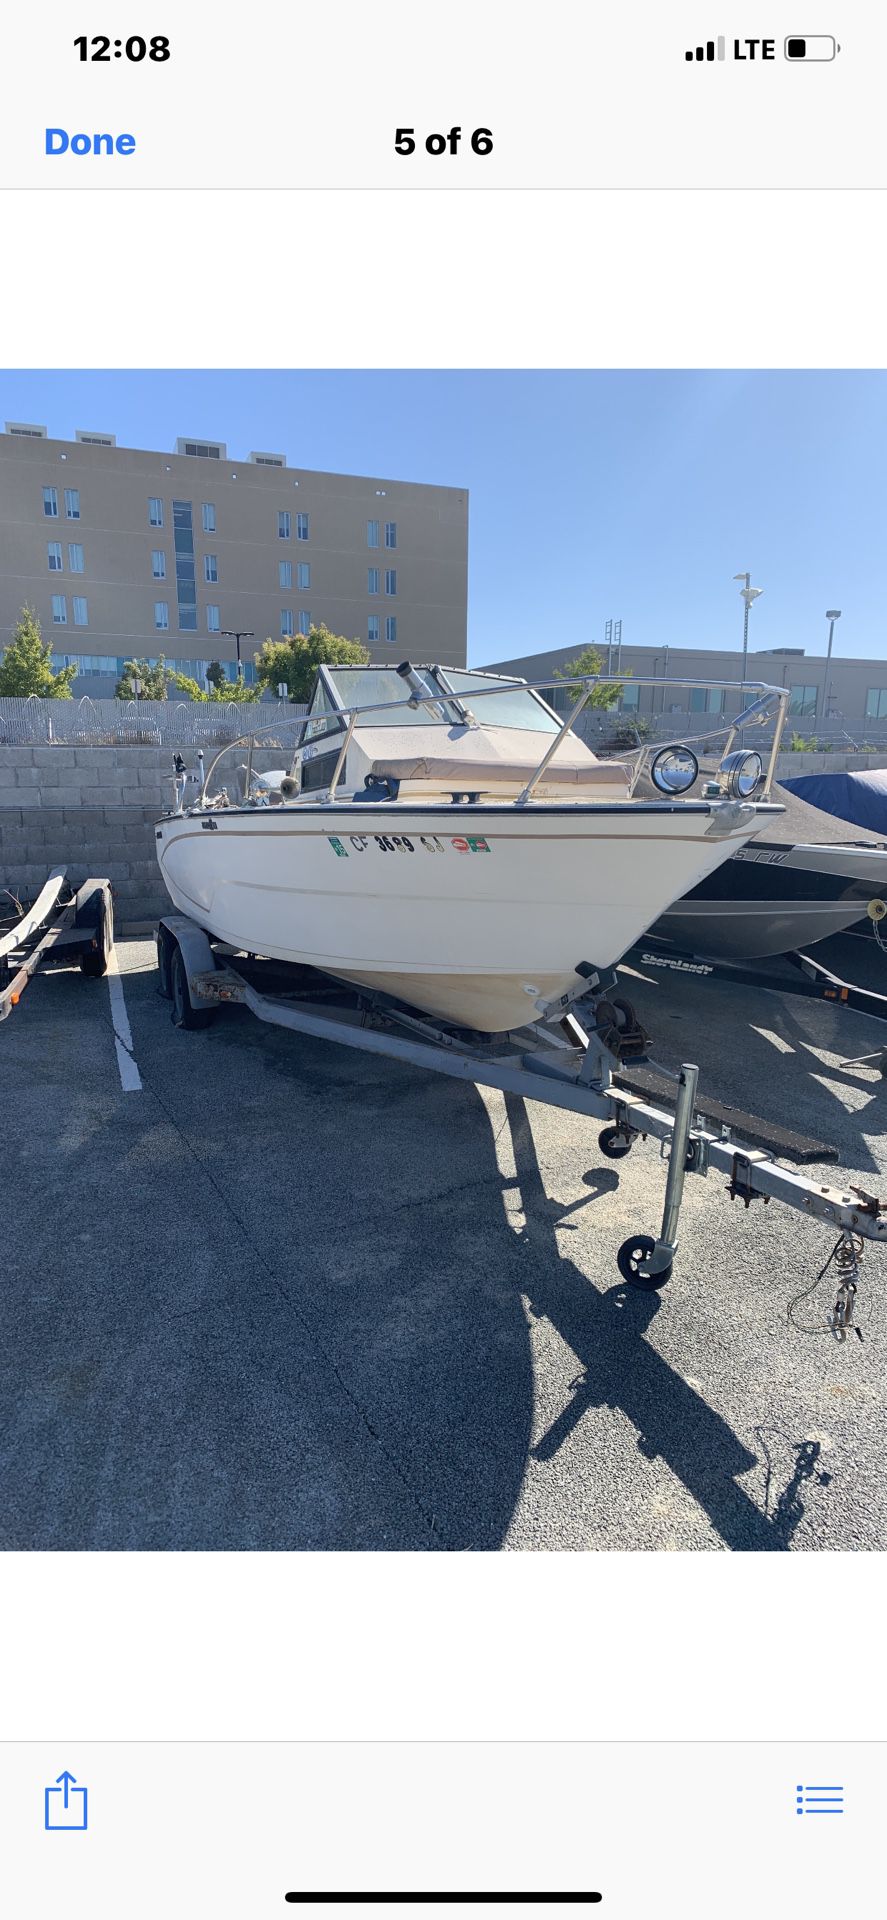 Fishing boat priced to sale, needs TLC